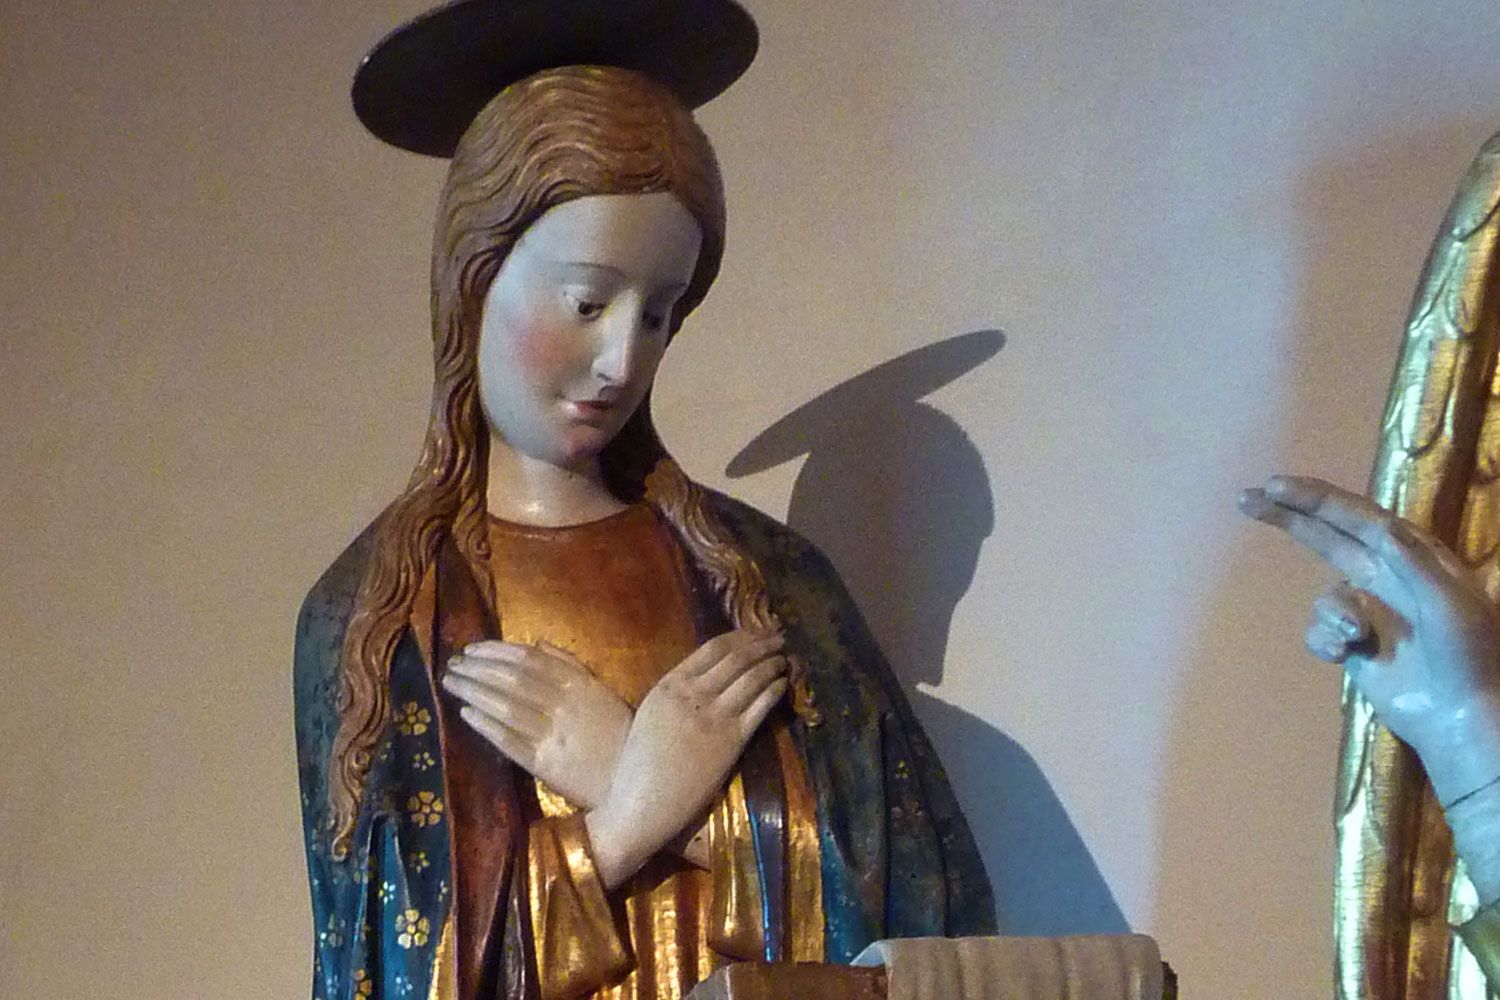 14th century Umbrian polychrome sculpture of the Annunciation